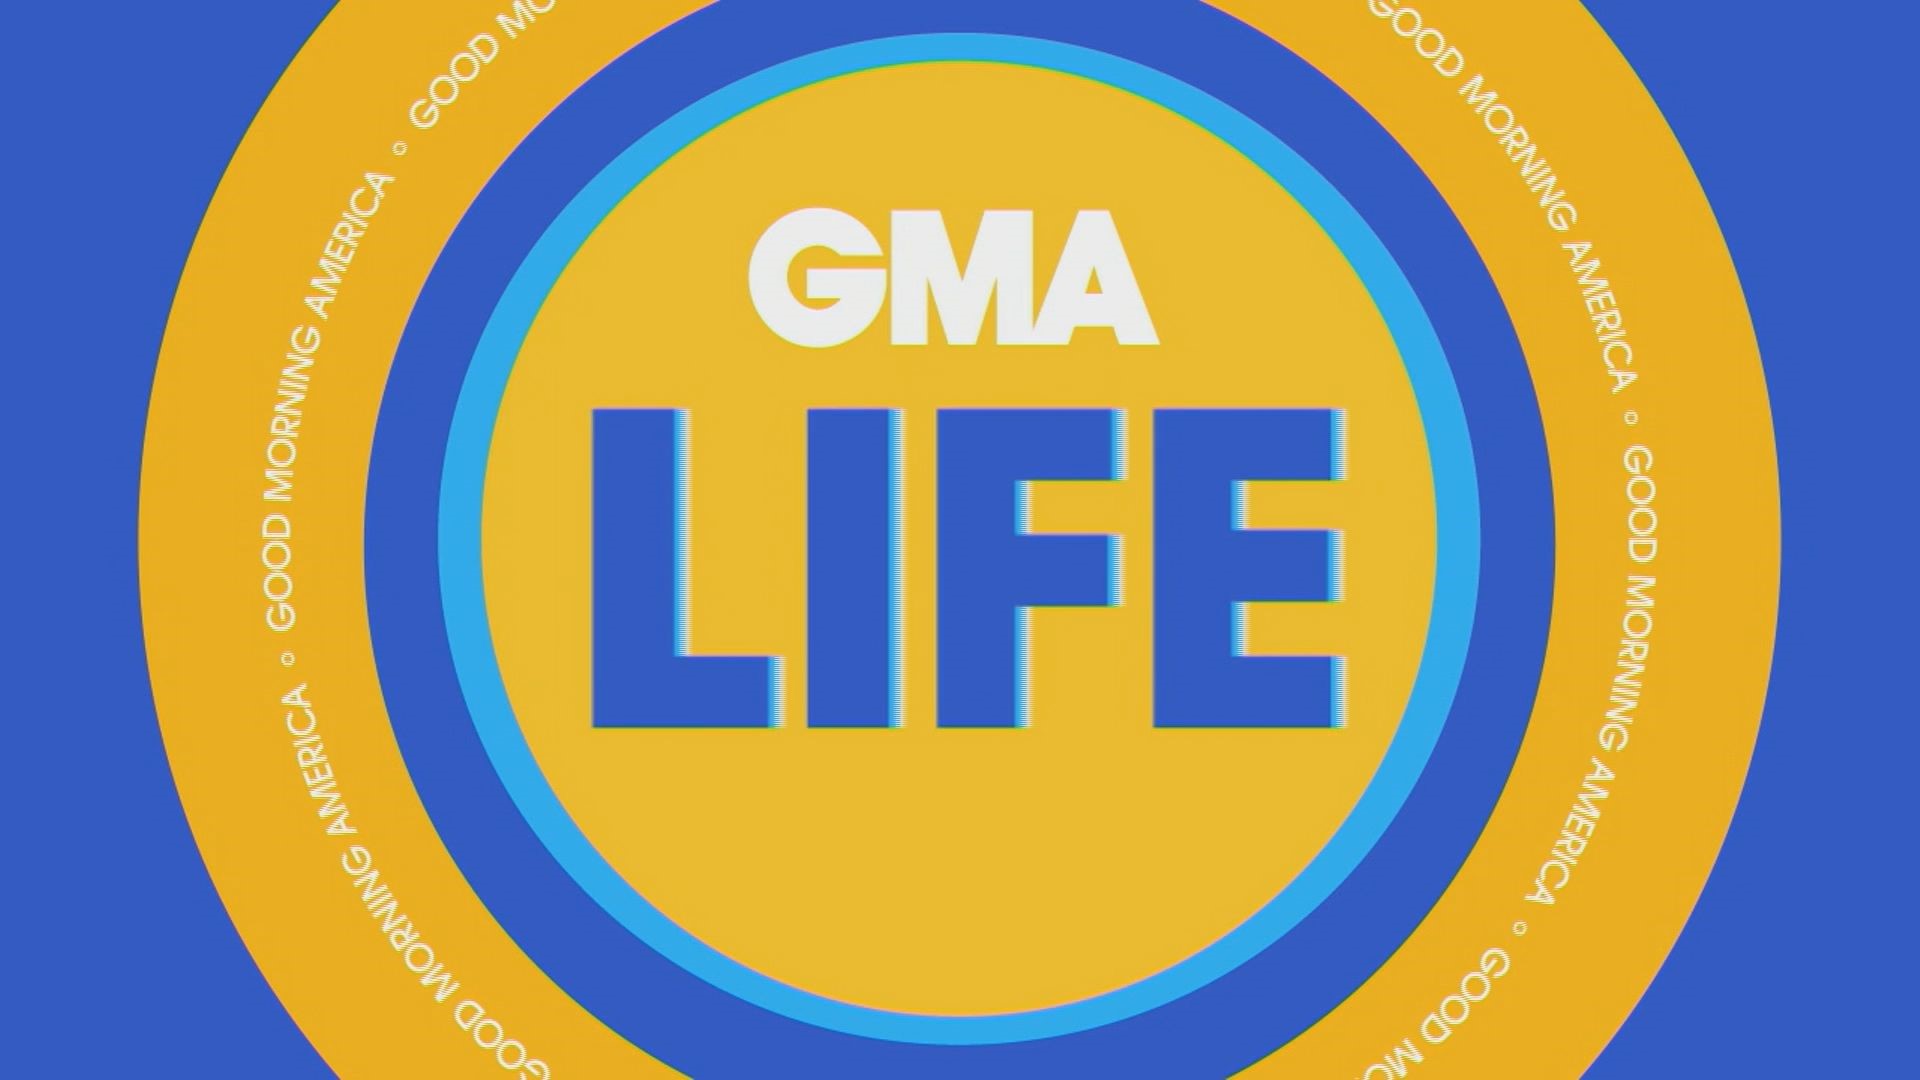 This week on GMA Life: America’s Child Care Crunch, The Right Stuff Live from Cleveland, Ohio, and our August GMA Book Club pick!